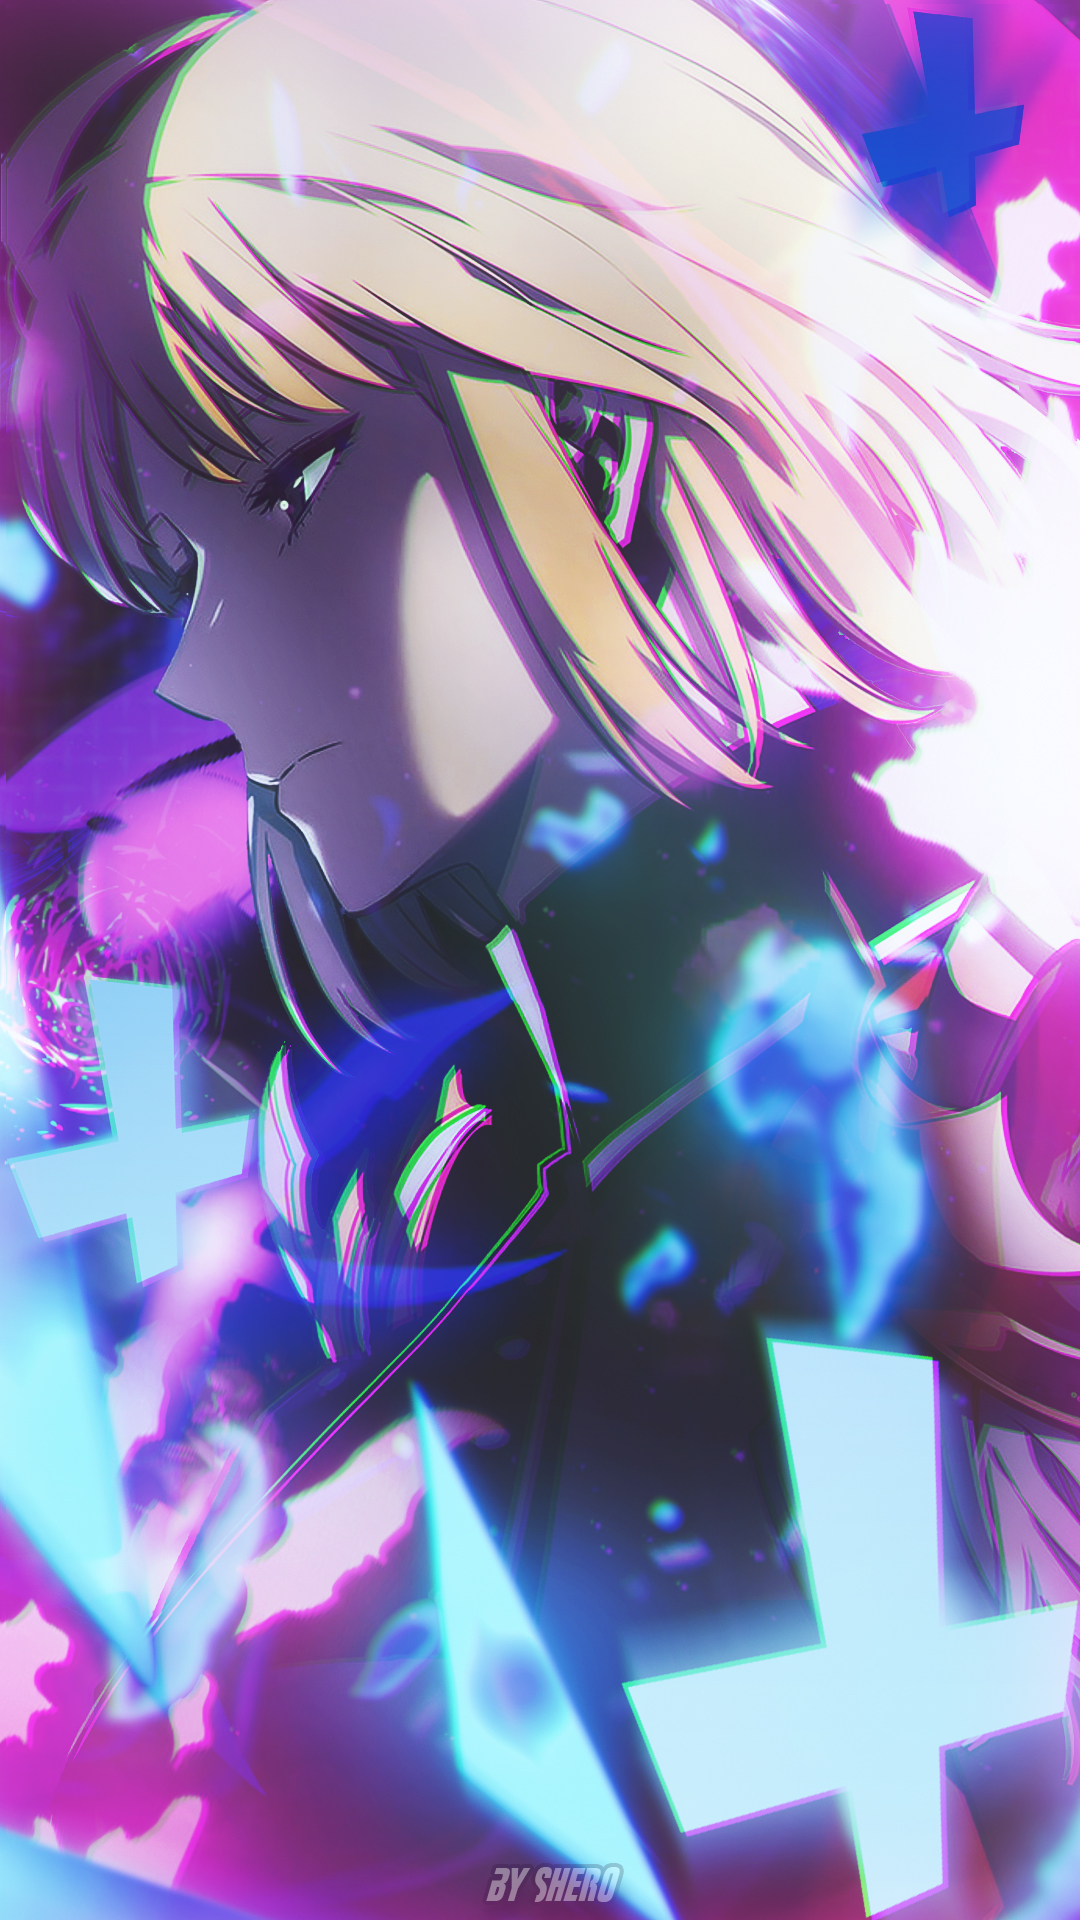 Solo Leveling Anime Girls Signature Manwhua Blonde Looking Away Short Hair Portrait Display 1080x1920